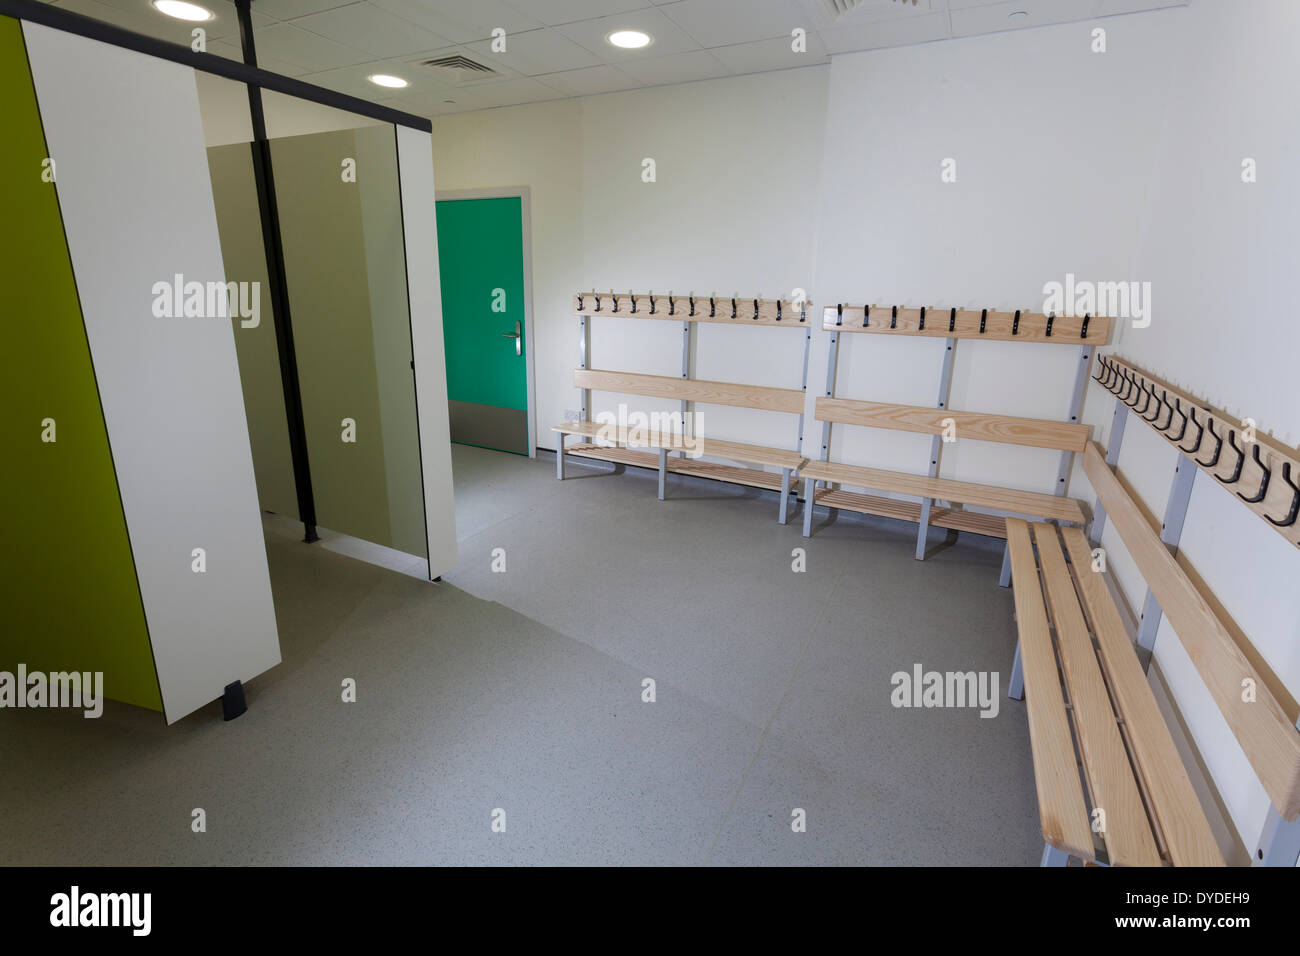 Unoccupied school changing room with benches and cubicles. Stock Photo